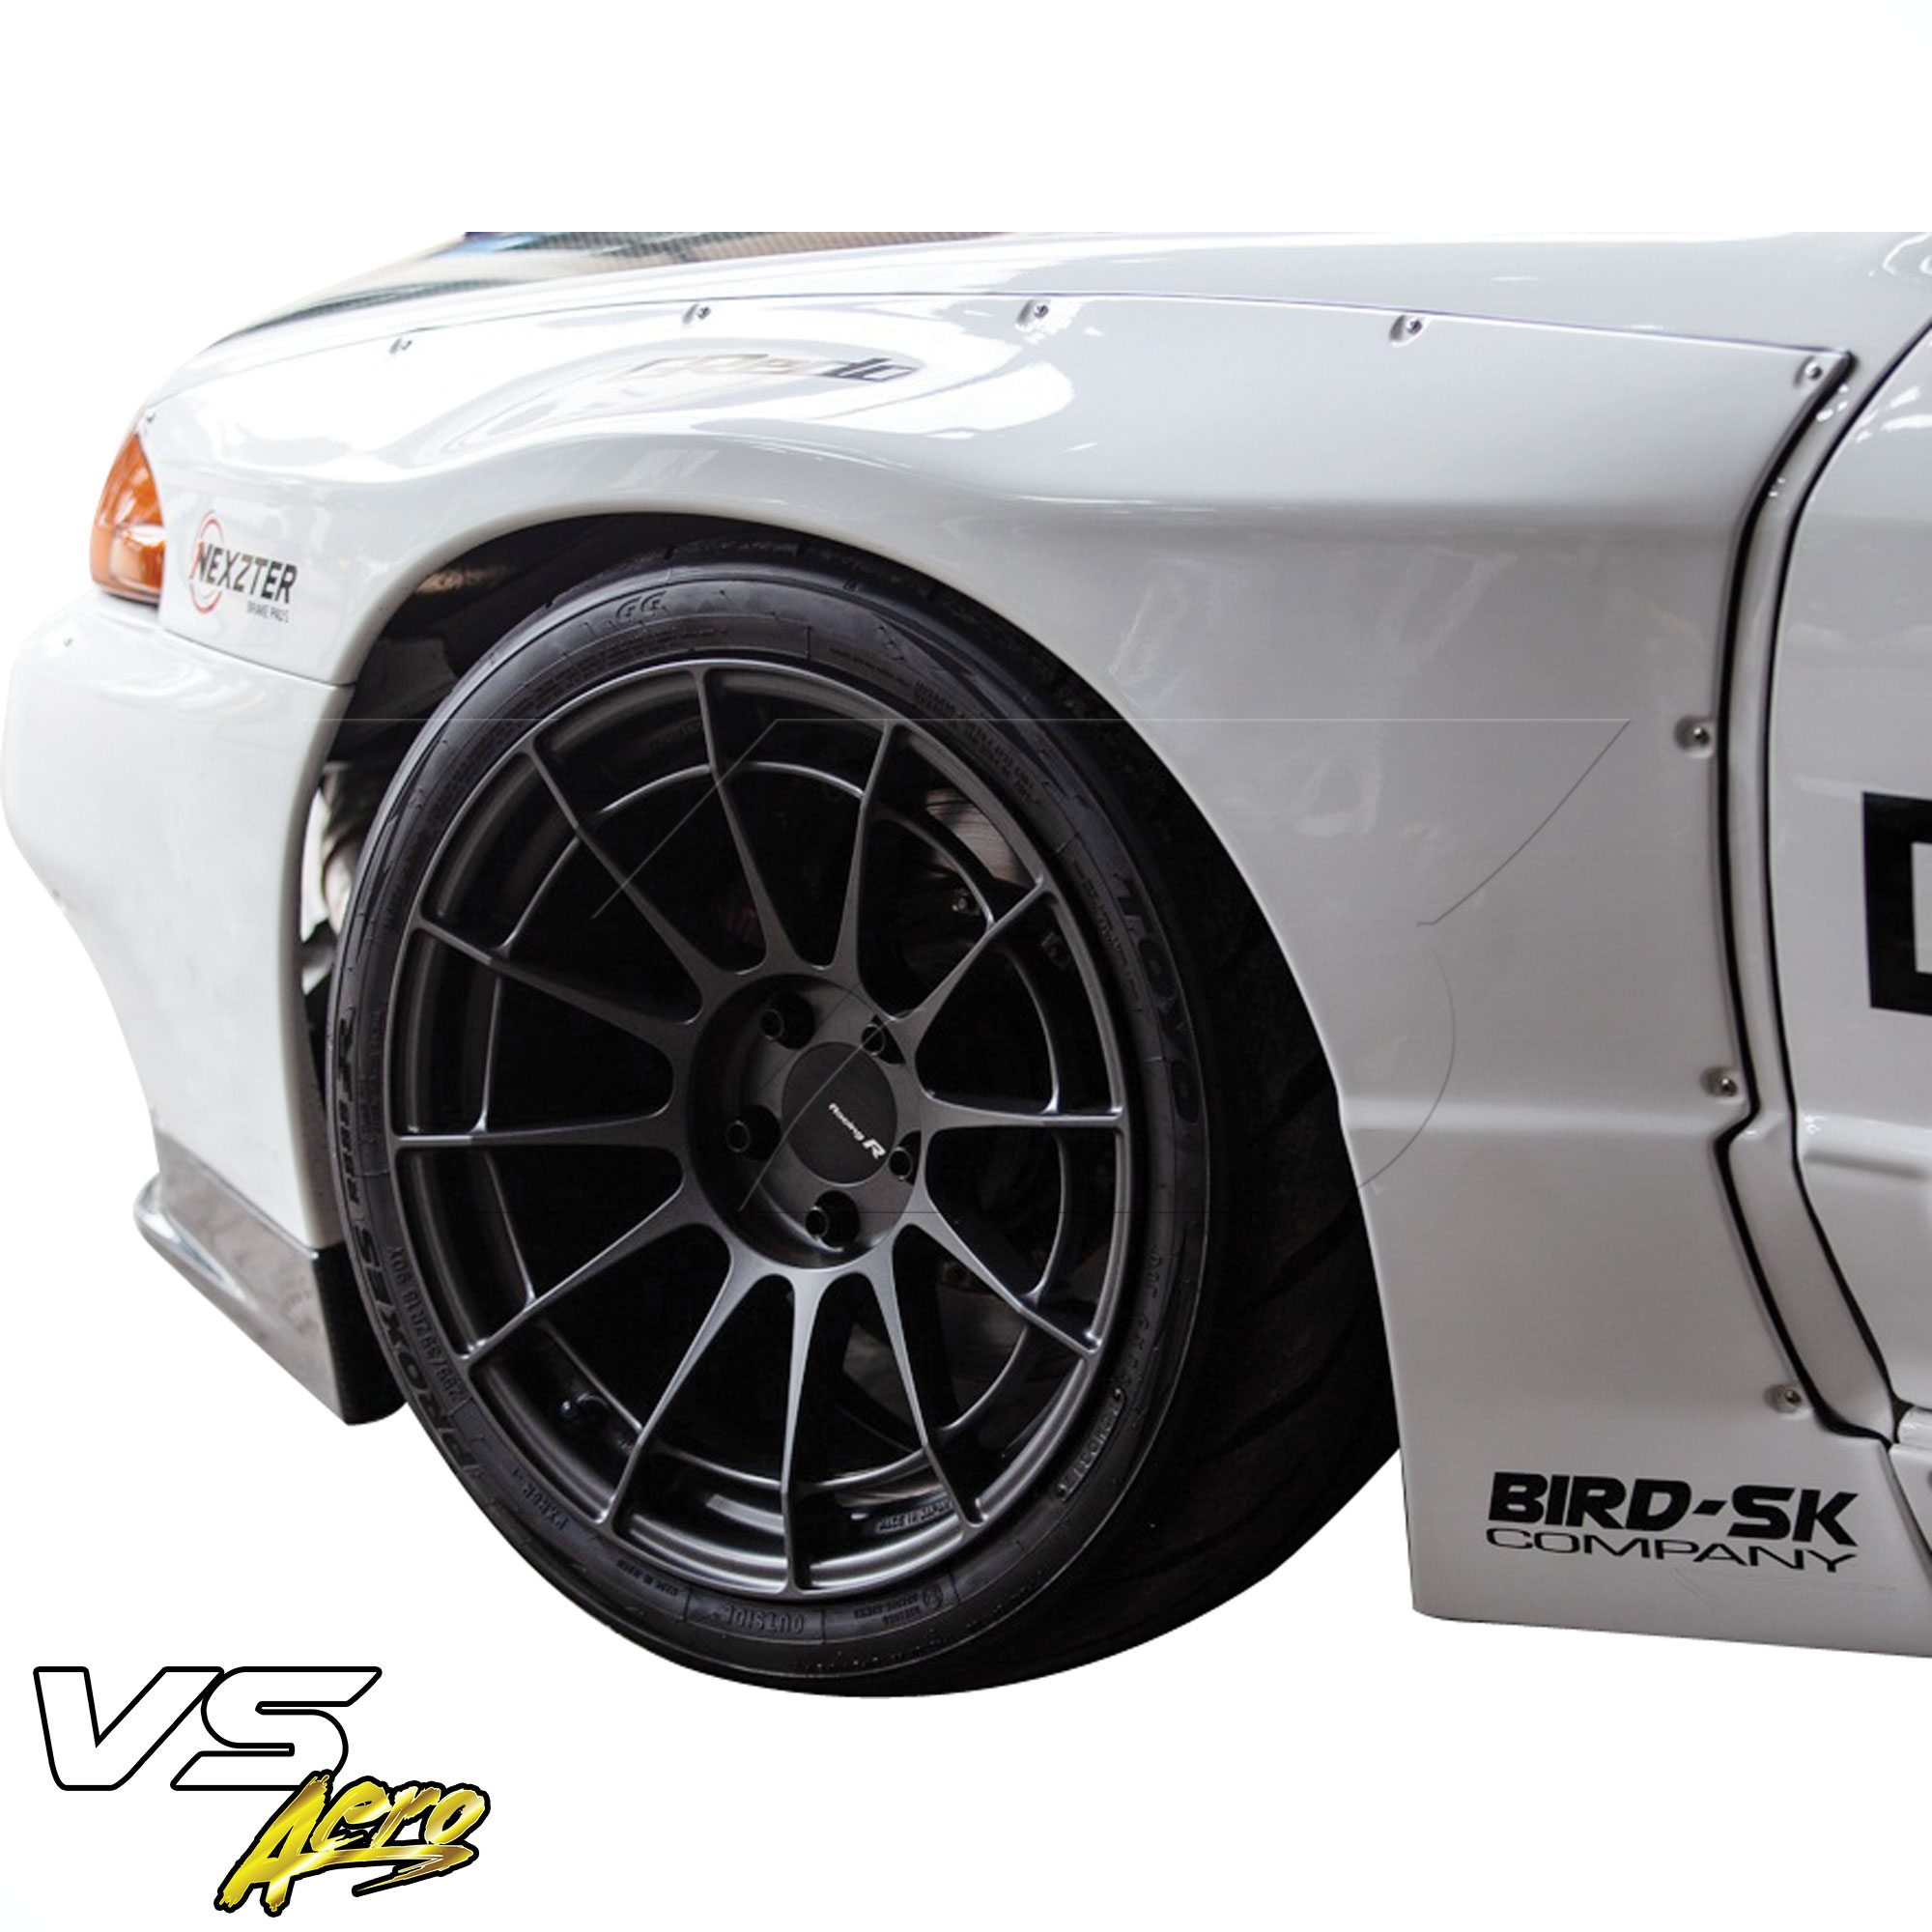 VSaero FRP TKYO Wide Body 40mm Fender Flares (front) 4pc > Nissan Skyline R32 1990-1994 > 2dr Coupe - Image 5